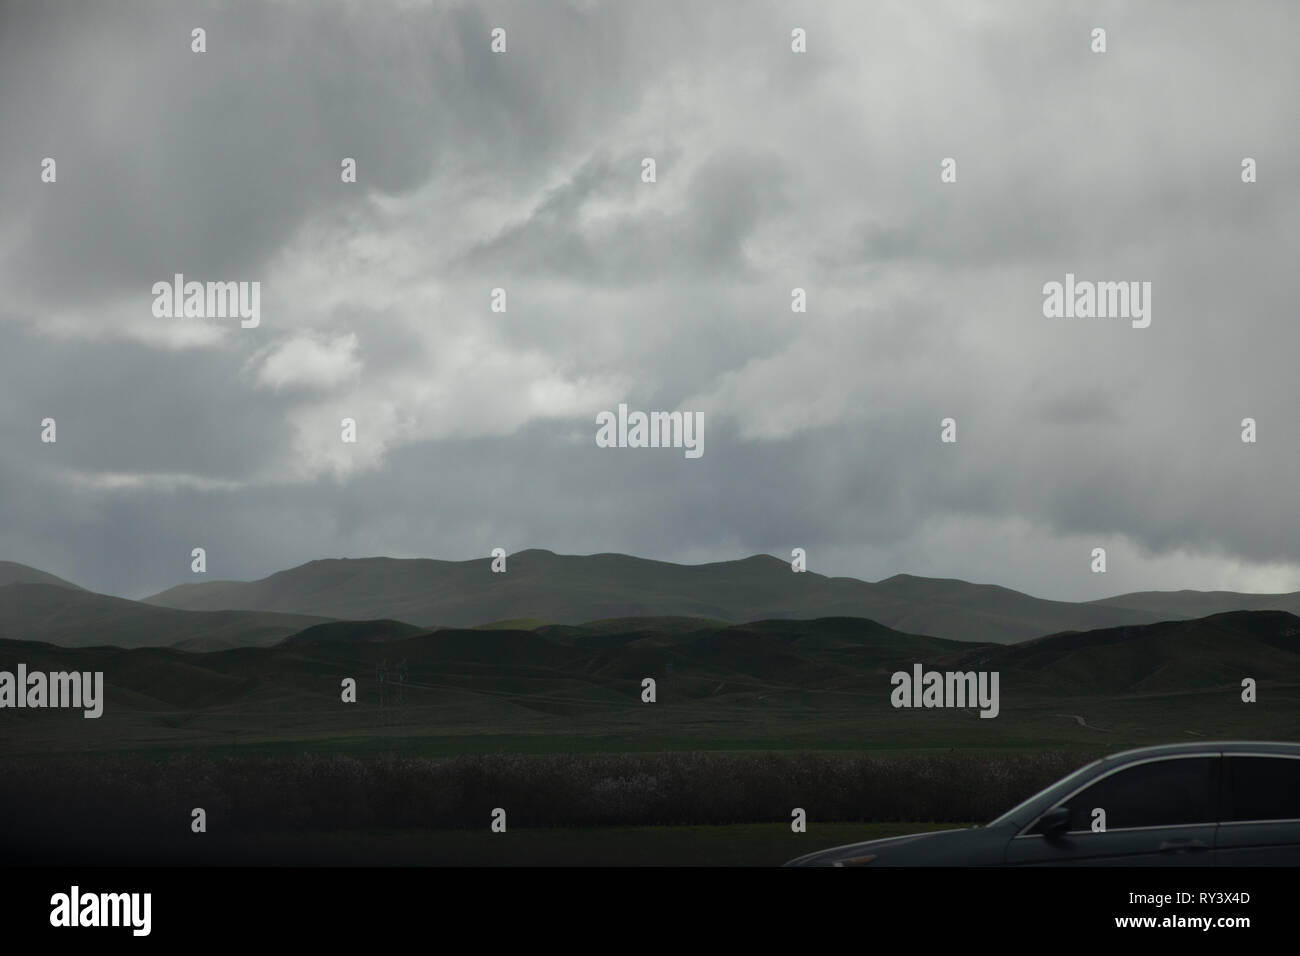 Cloudy sky with top of car Stock Photo